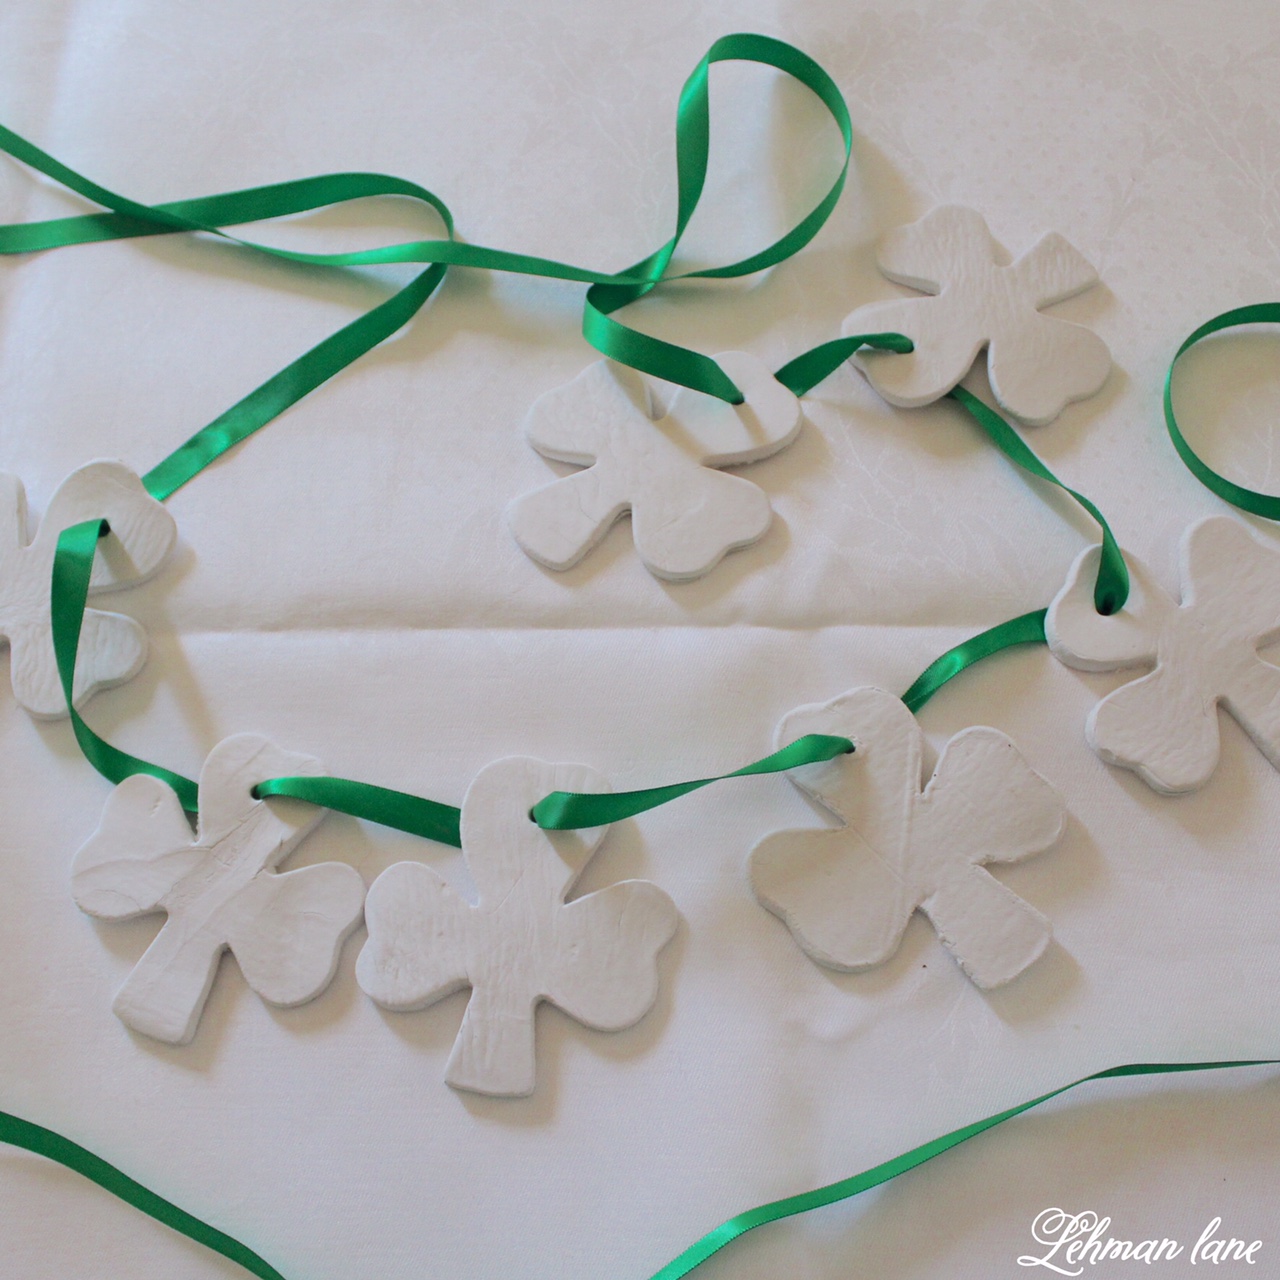 Come check out the super simple shamrock garland just in time to decorate for St. Patricks Day!